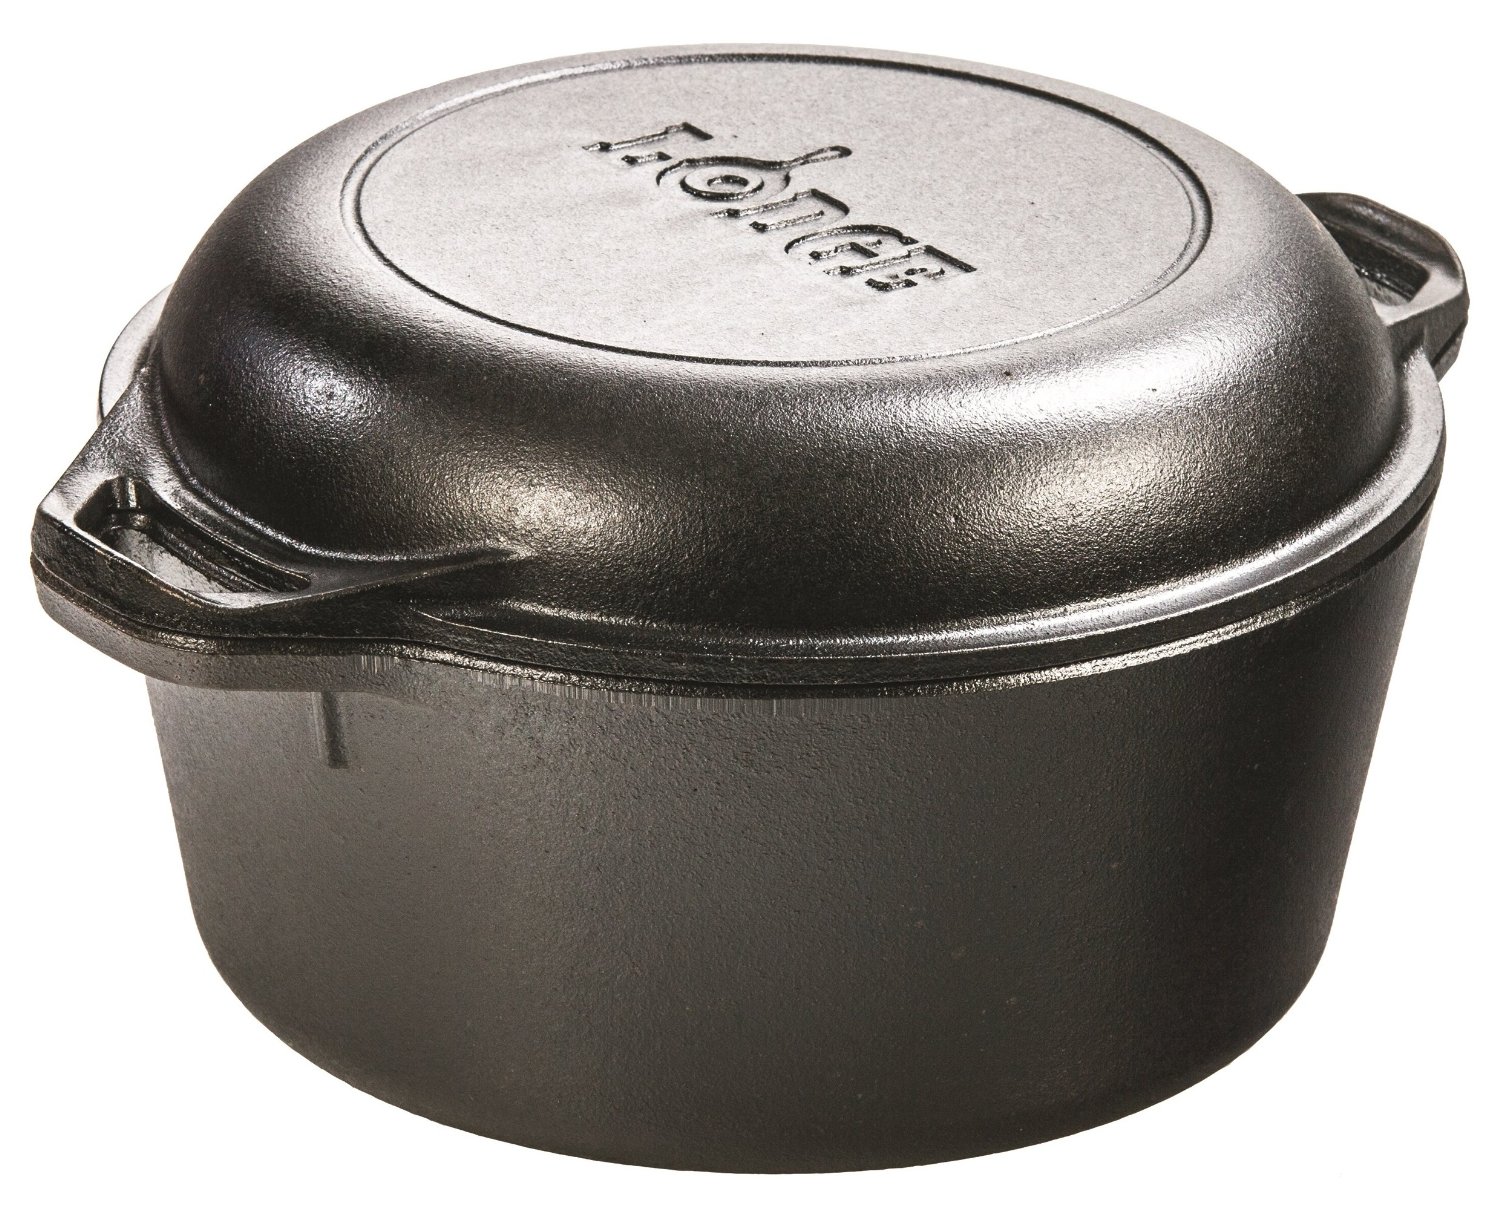 Lodge Double Dutch Oven and Casserole with Skillet Cover, 5-Quart – Just $31.49!